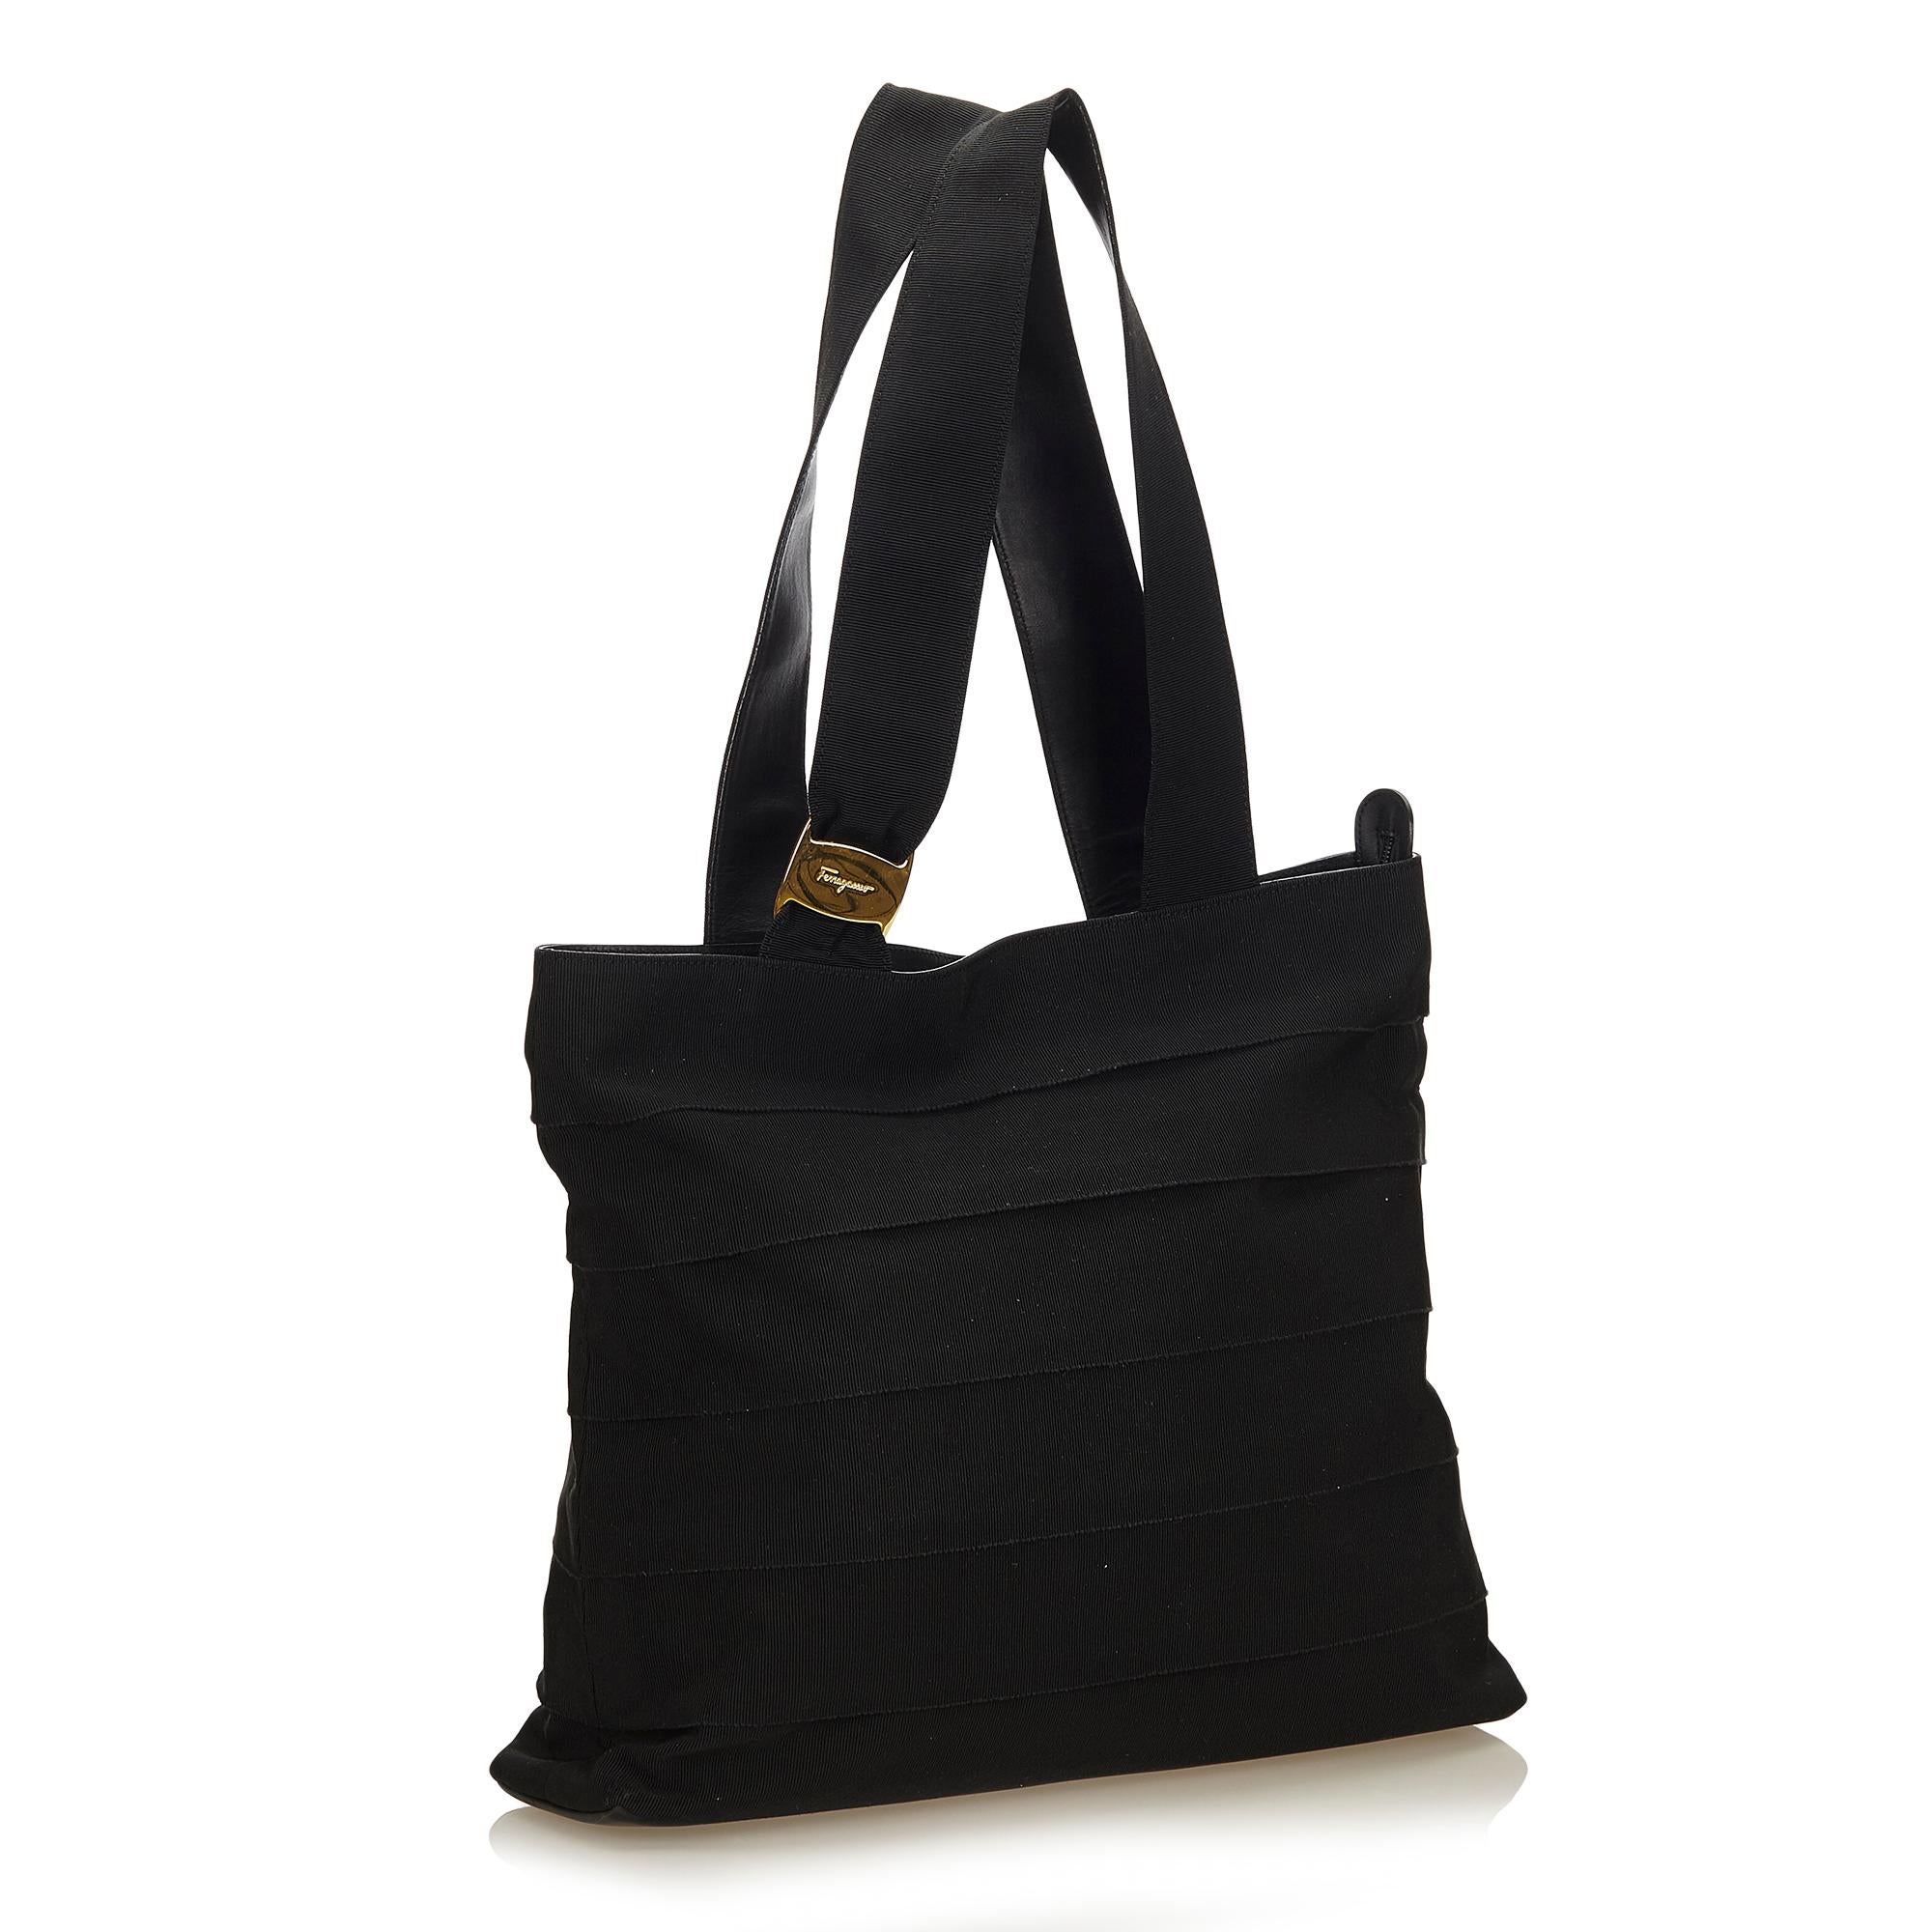 This tote bag features a ruffled grosgrain body with leather trim, flat straps, top zip closure, and interior zip pocket.

It carries a AB condition rating.

Dimensions: 
Length 32.00 cm
Width 37.00 cm
Depth 10.50 cm
Shoulder Drop 28.00